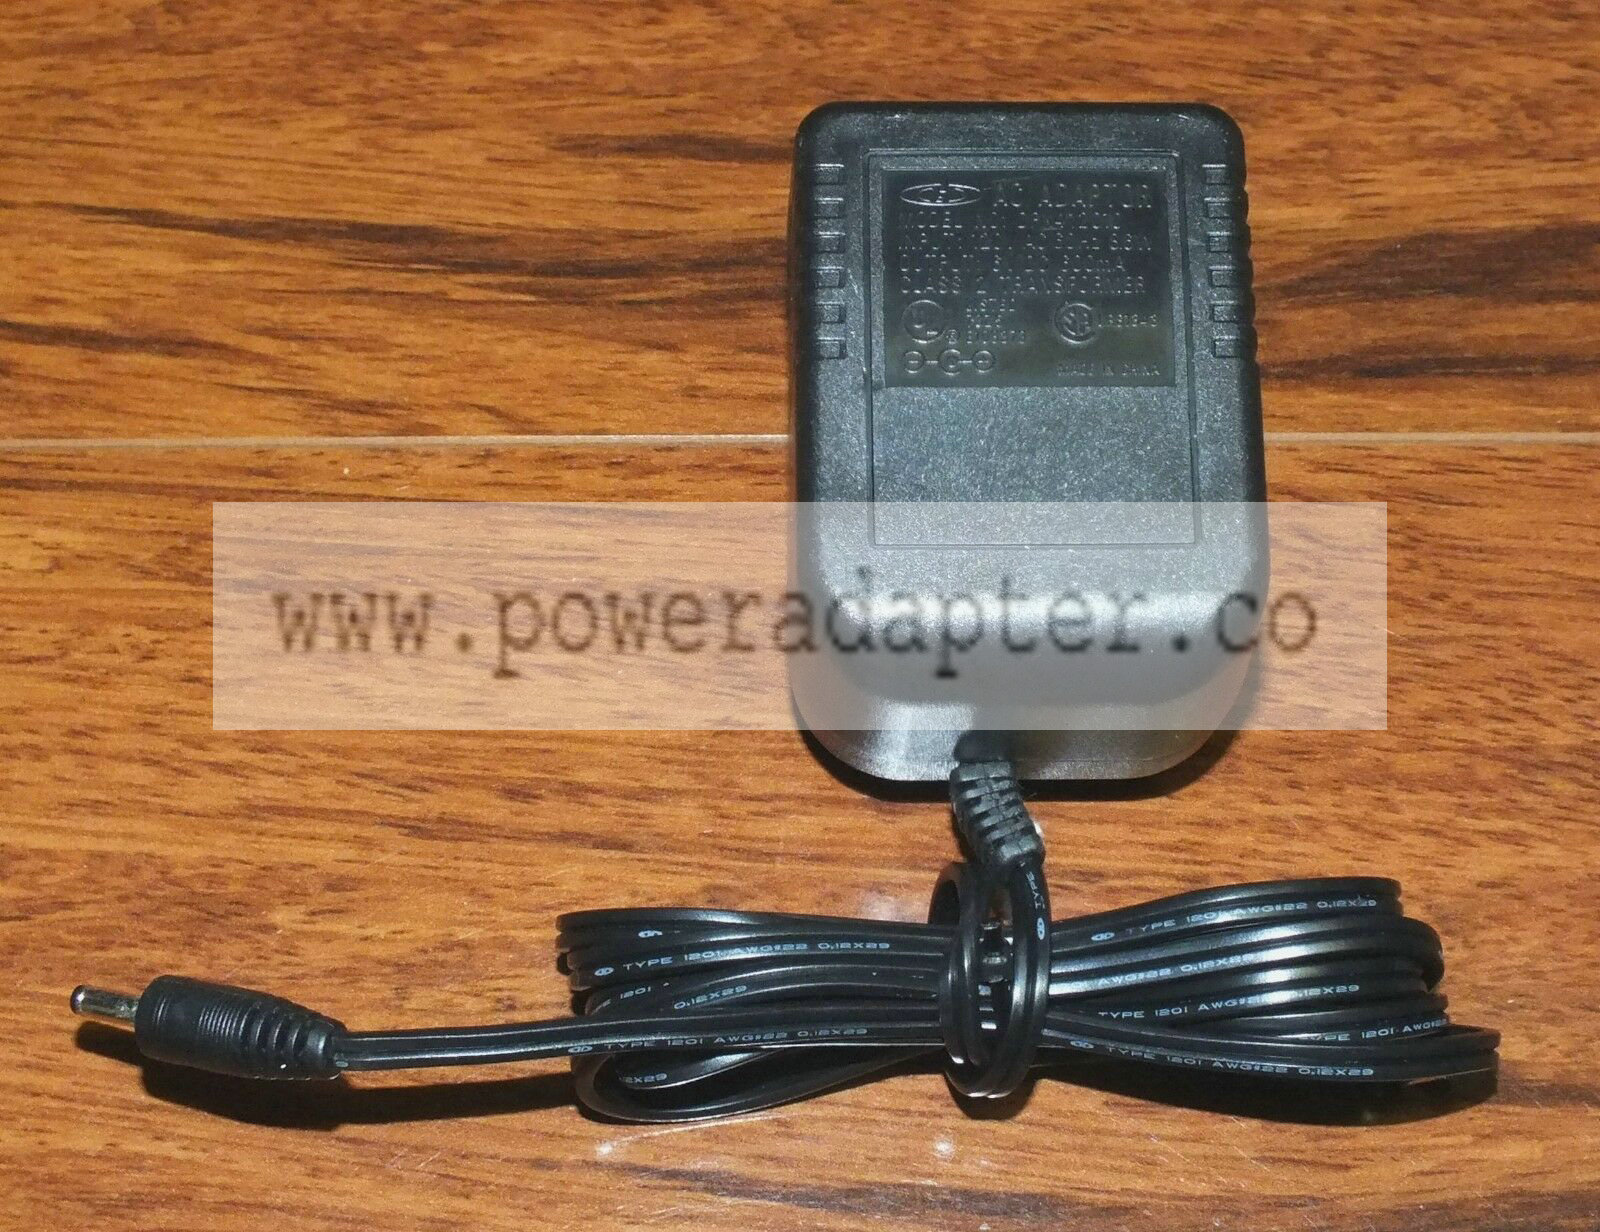 Genuine CHD AC Adaptor (DPX412010) Class 2 Transformer Output: 6VDC 600mA Type: AC to DC Brand: See Pictures Model: